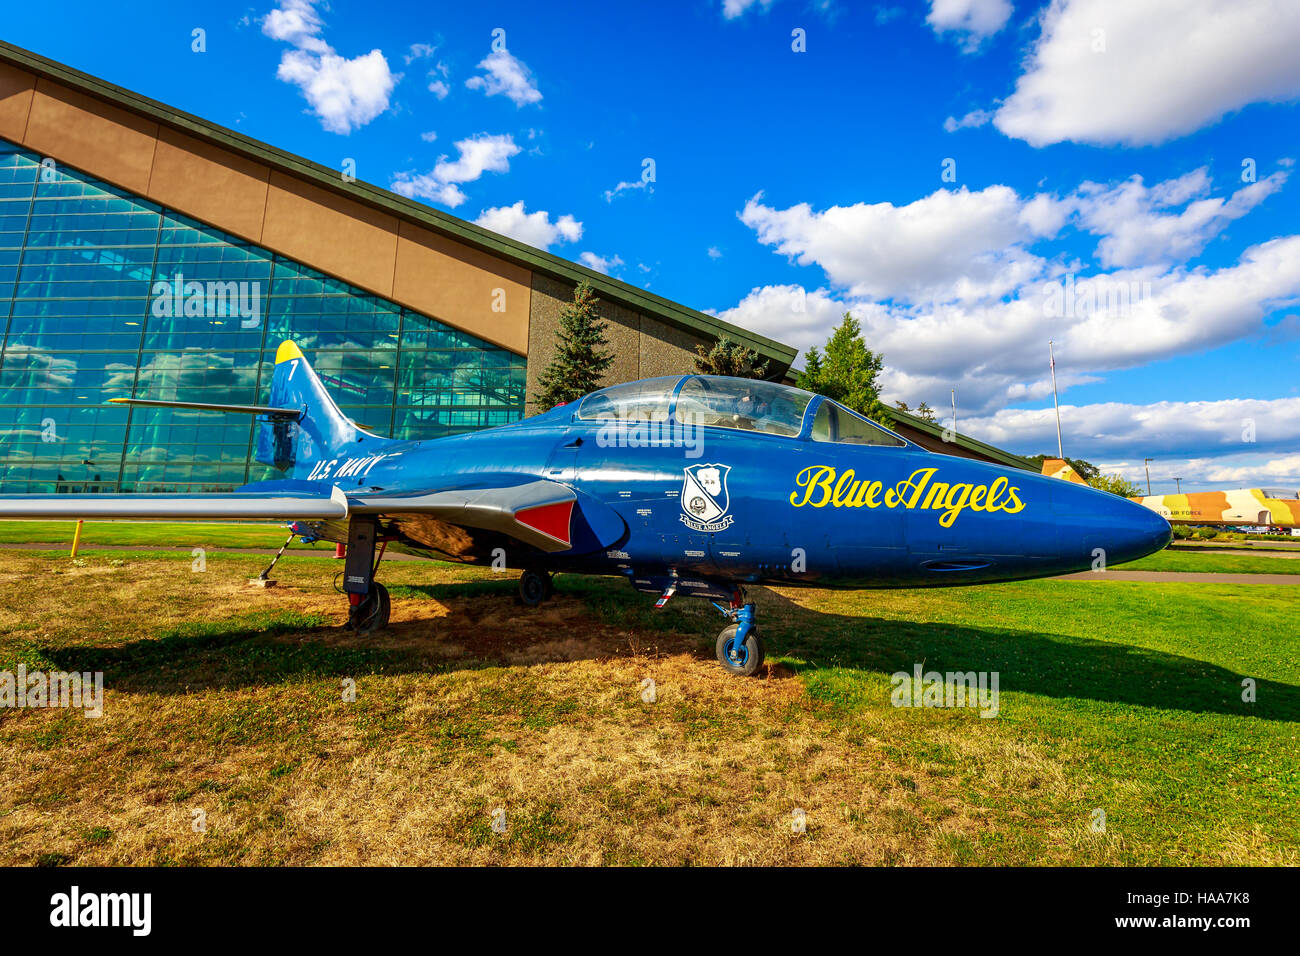 McMinnville, Oregon - August 31, 2014: Grumman TF-9J Cougar fighter aircraft in the color of the 'Blue Angels' on exhibition at Evergreen Aviation & S Stock Photo